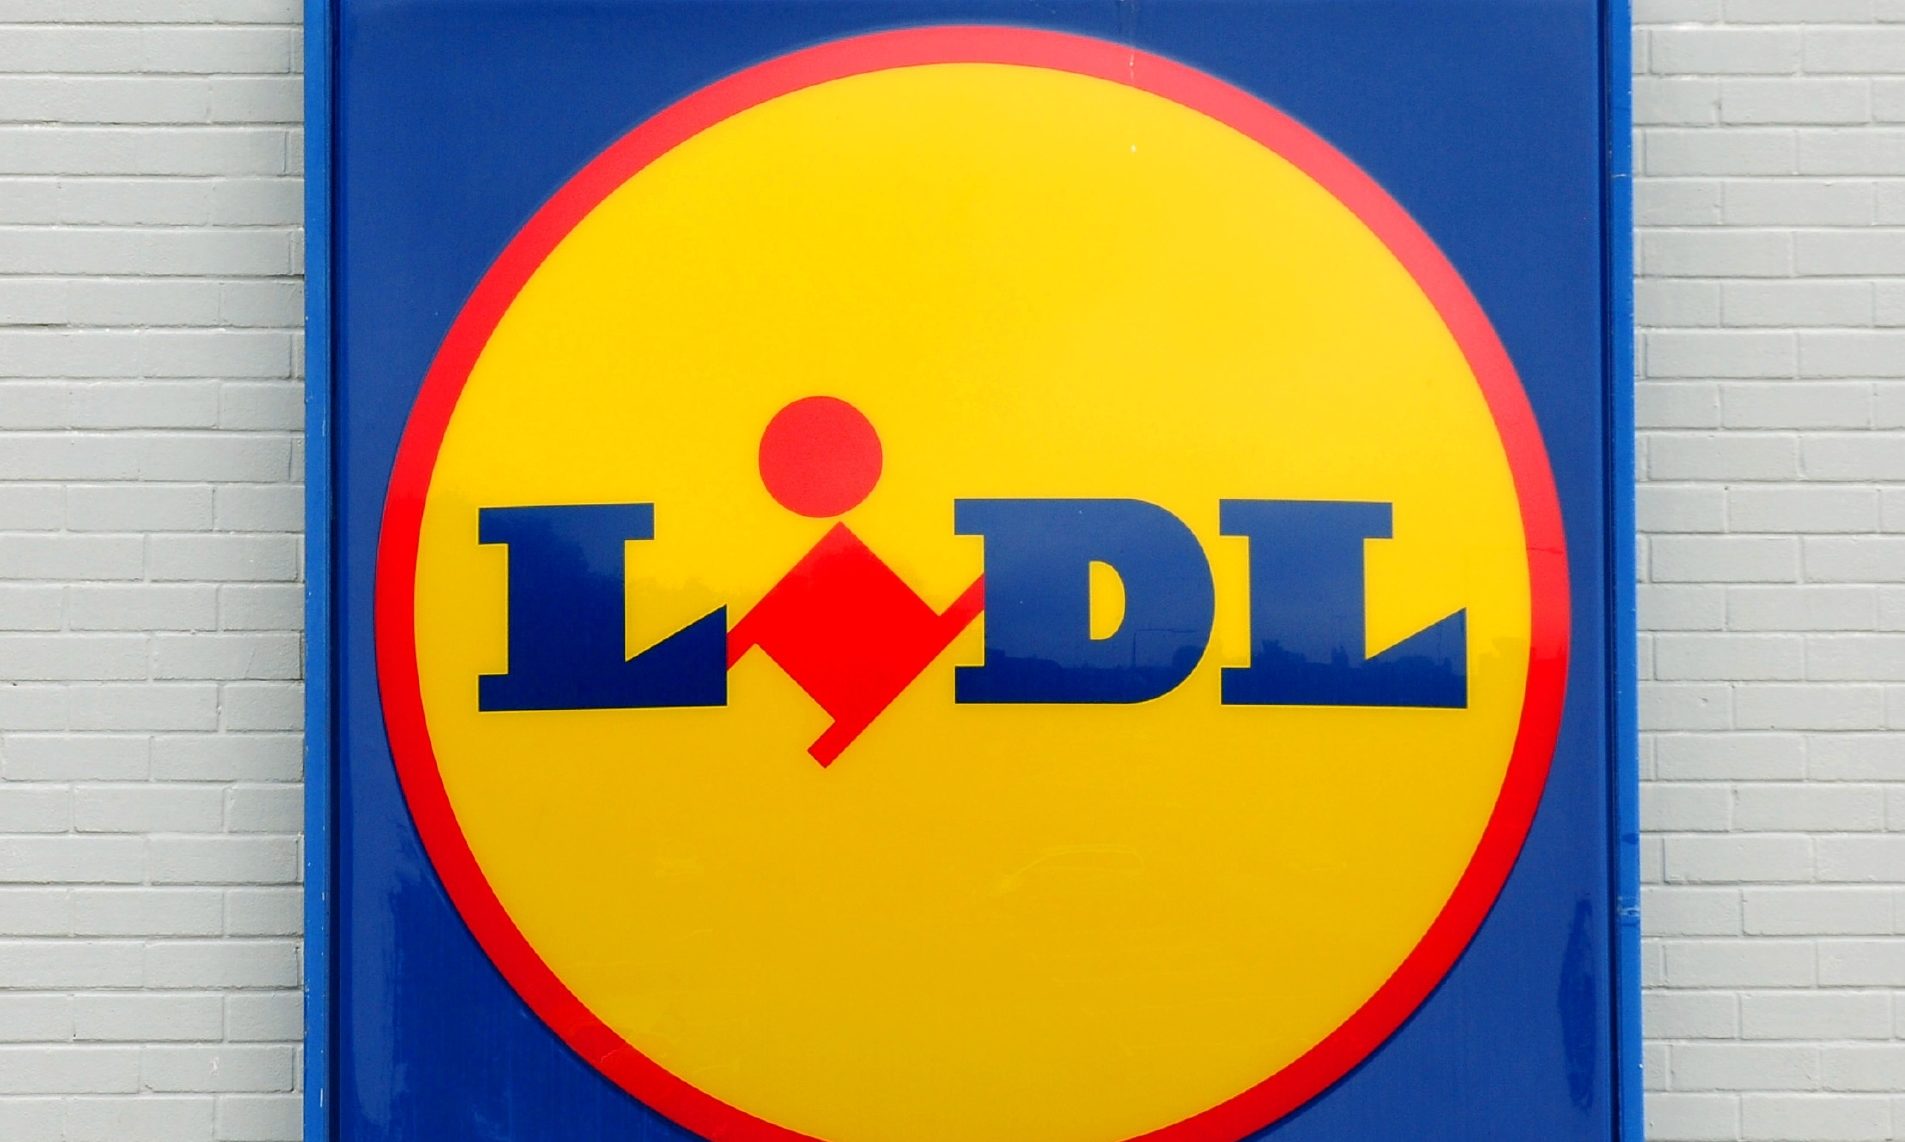 A general view of a Lidl supermarket logo.